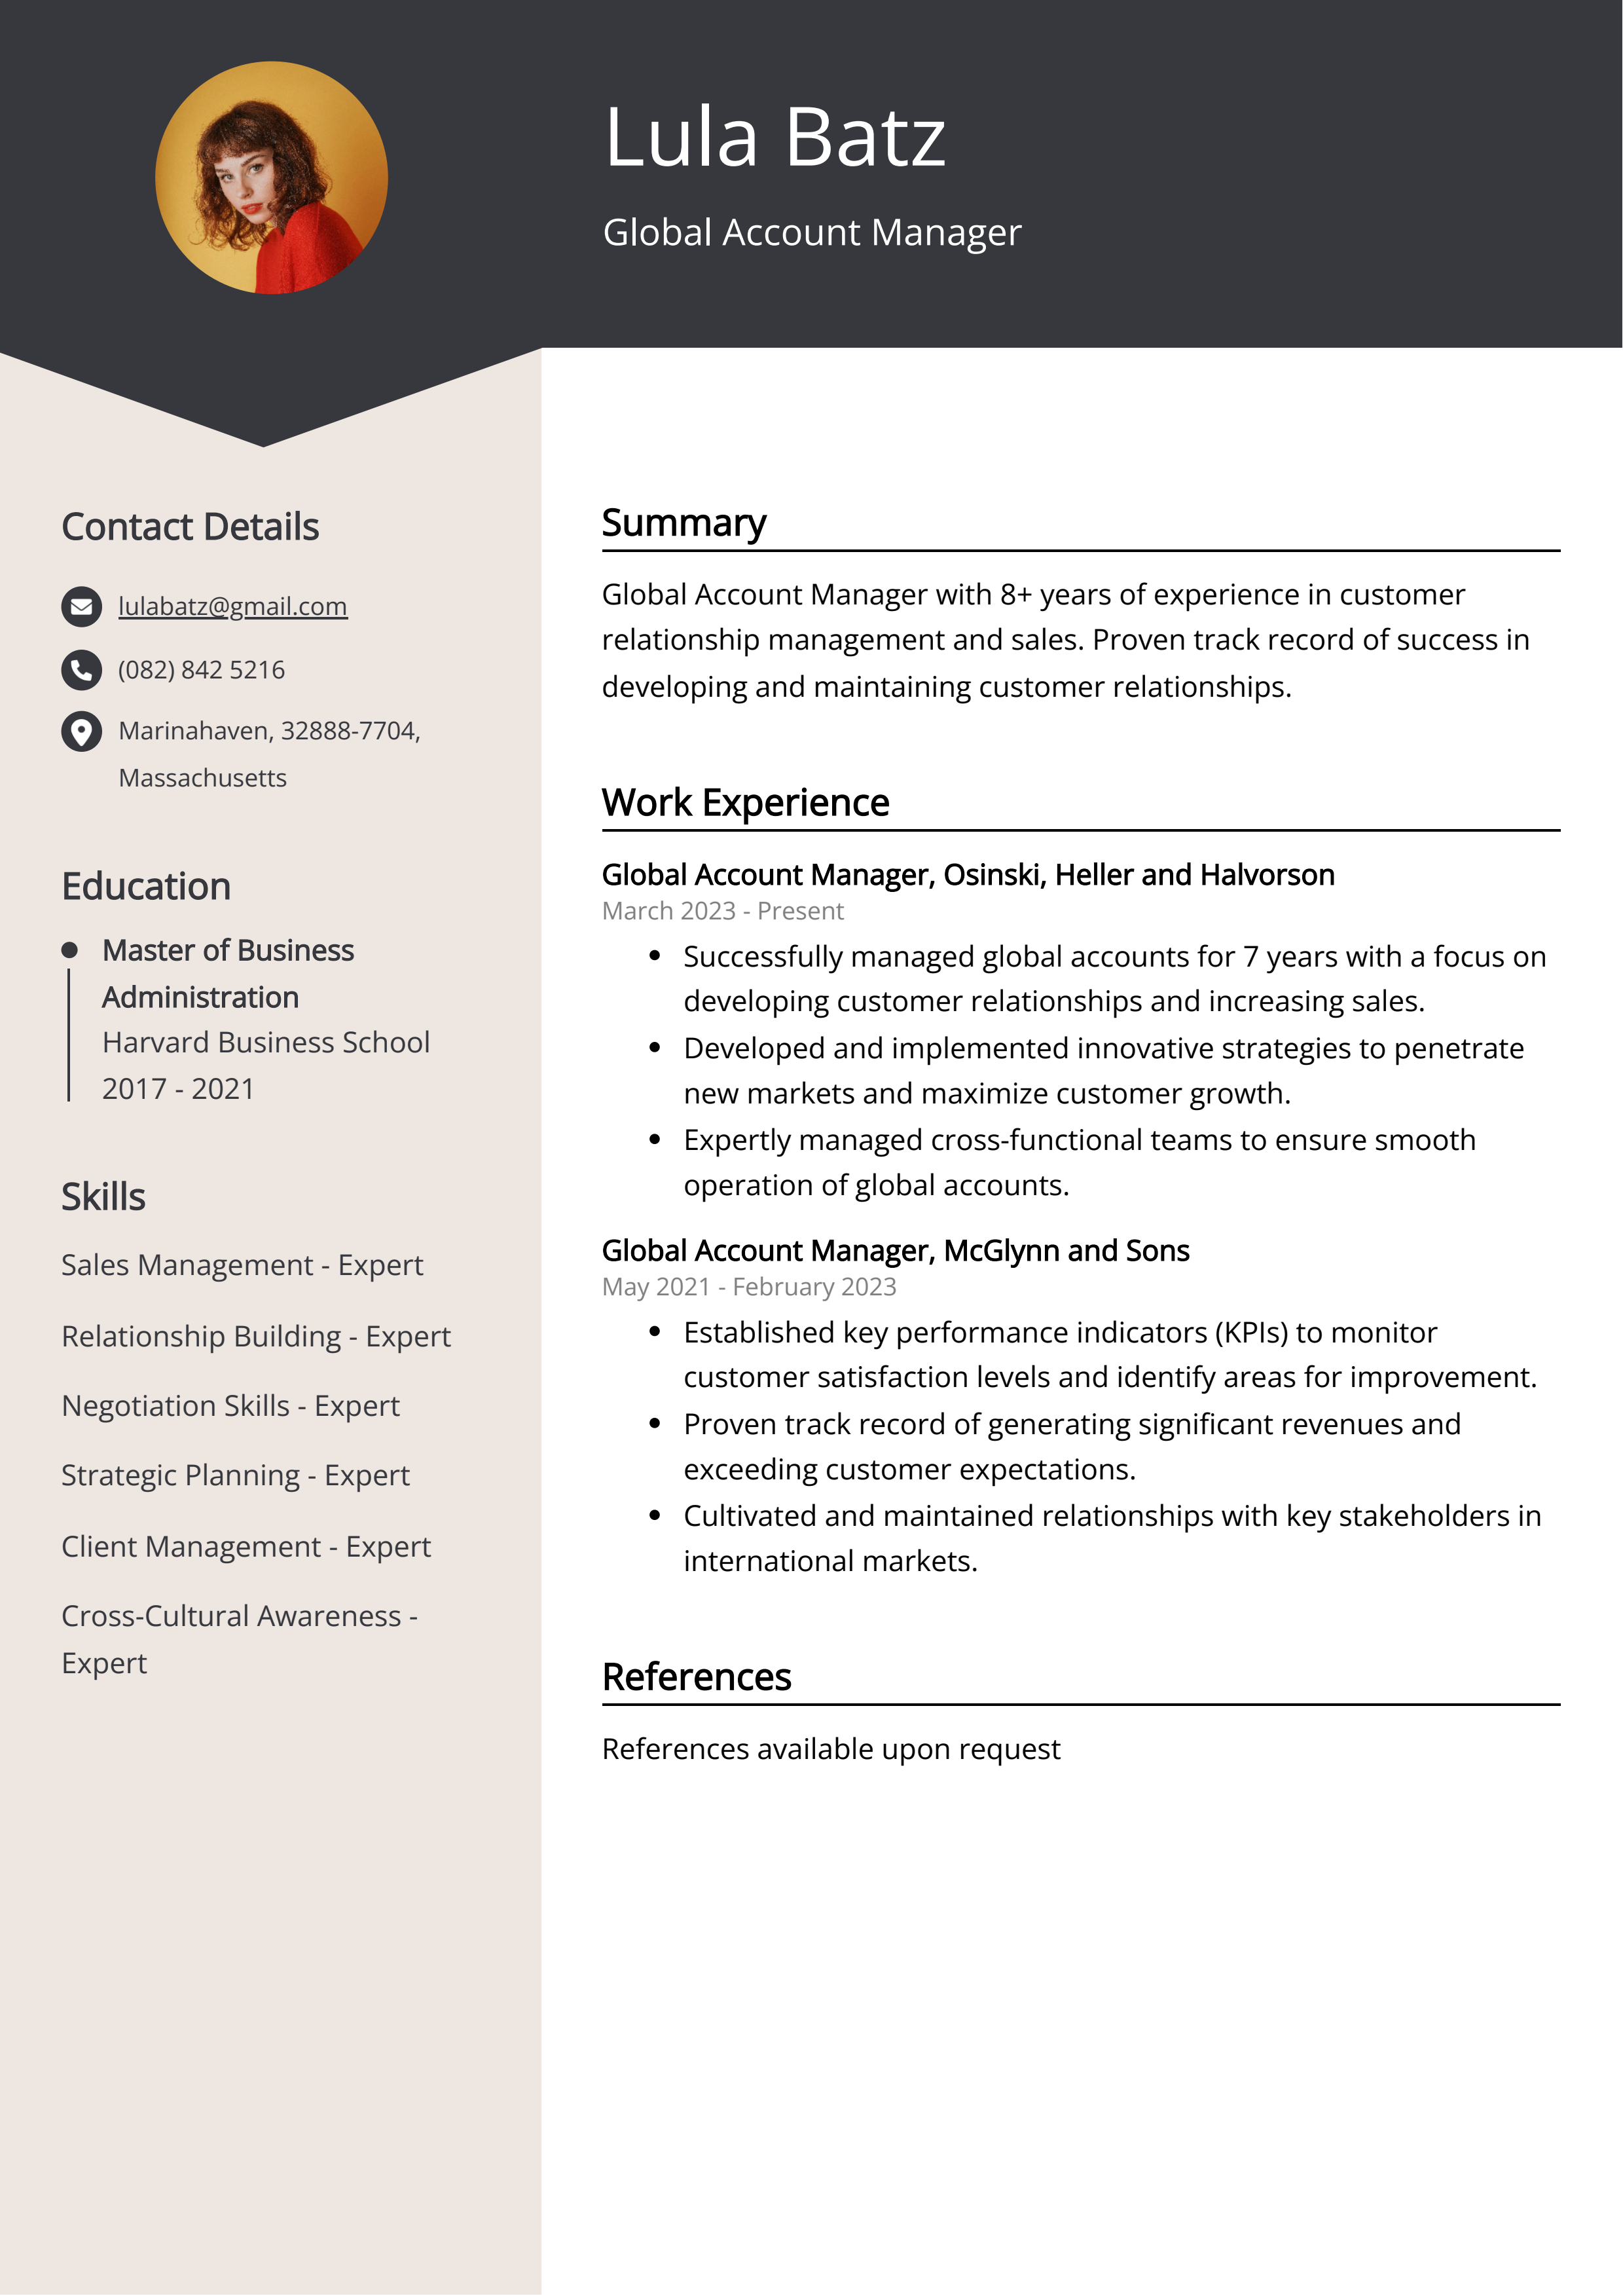 Global Account Manager CV Example